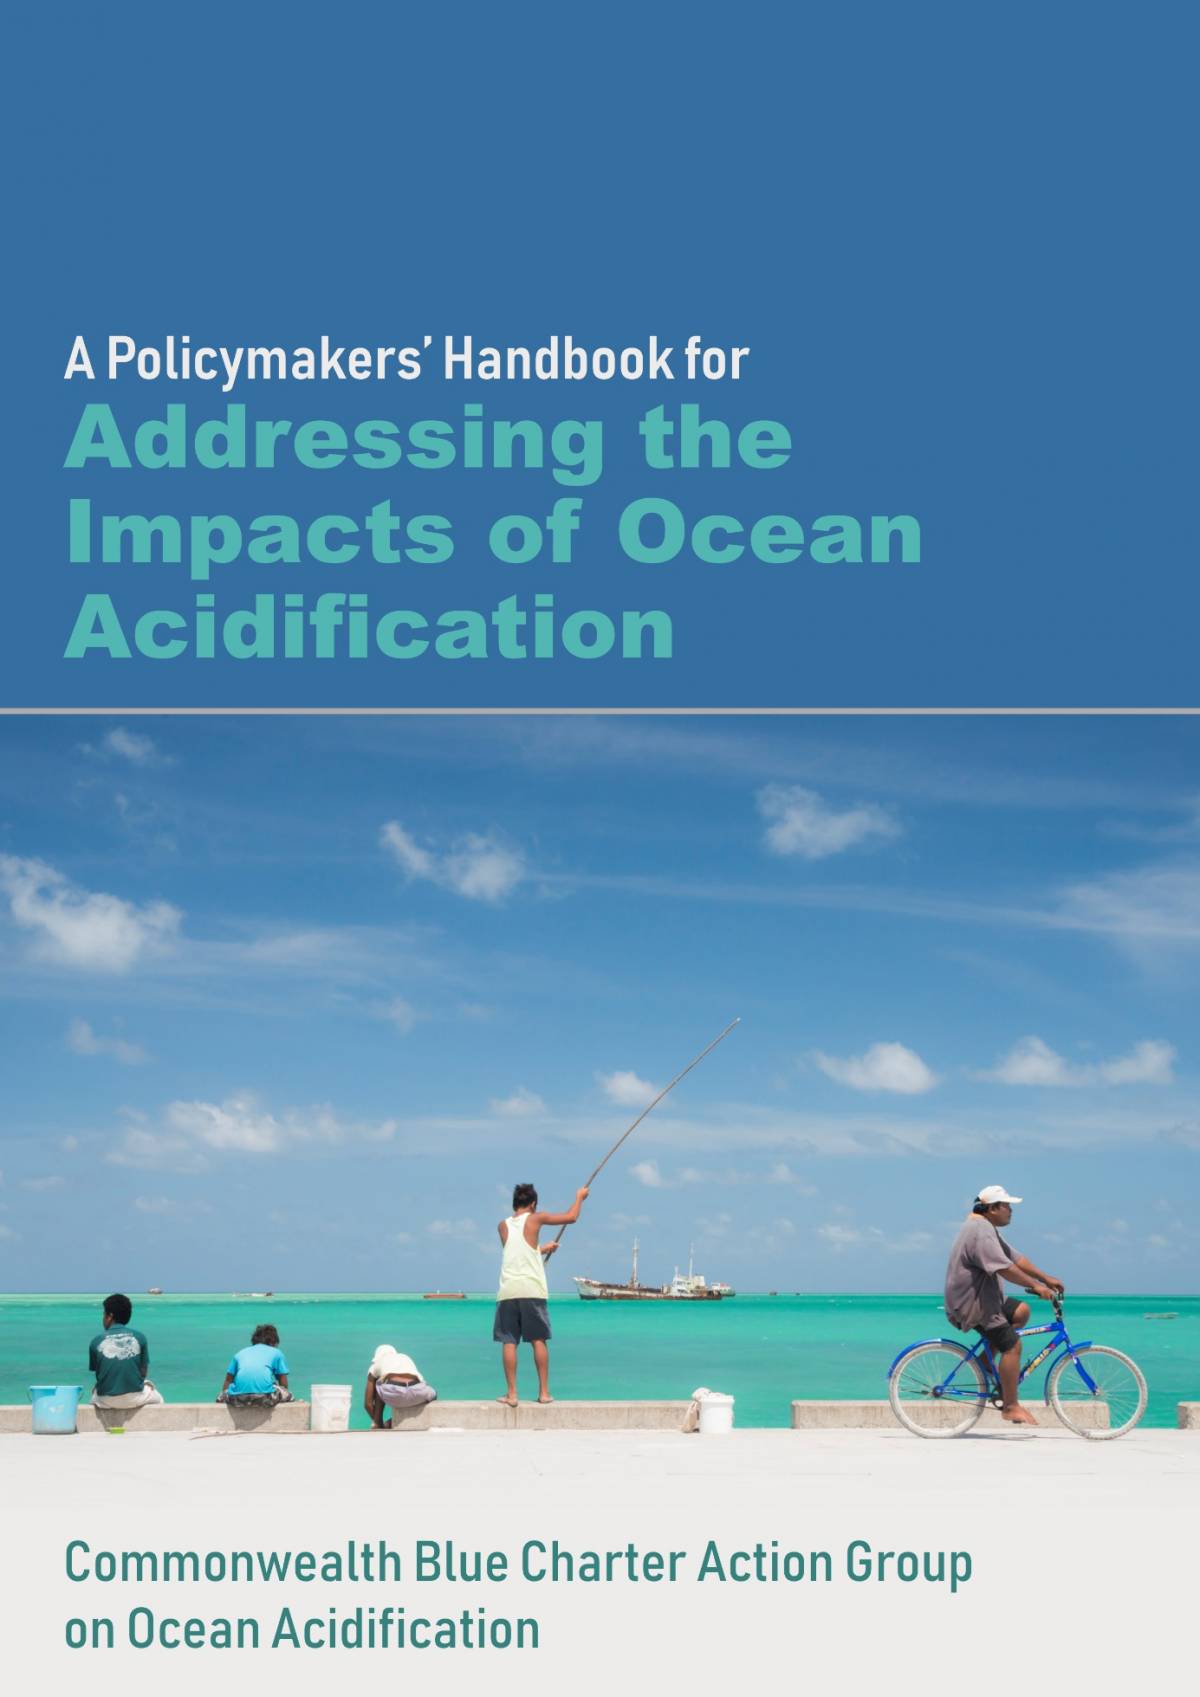 A Policymaker's Handbook for Addressing the Impacts of Ocean Acidification. 